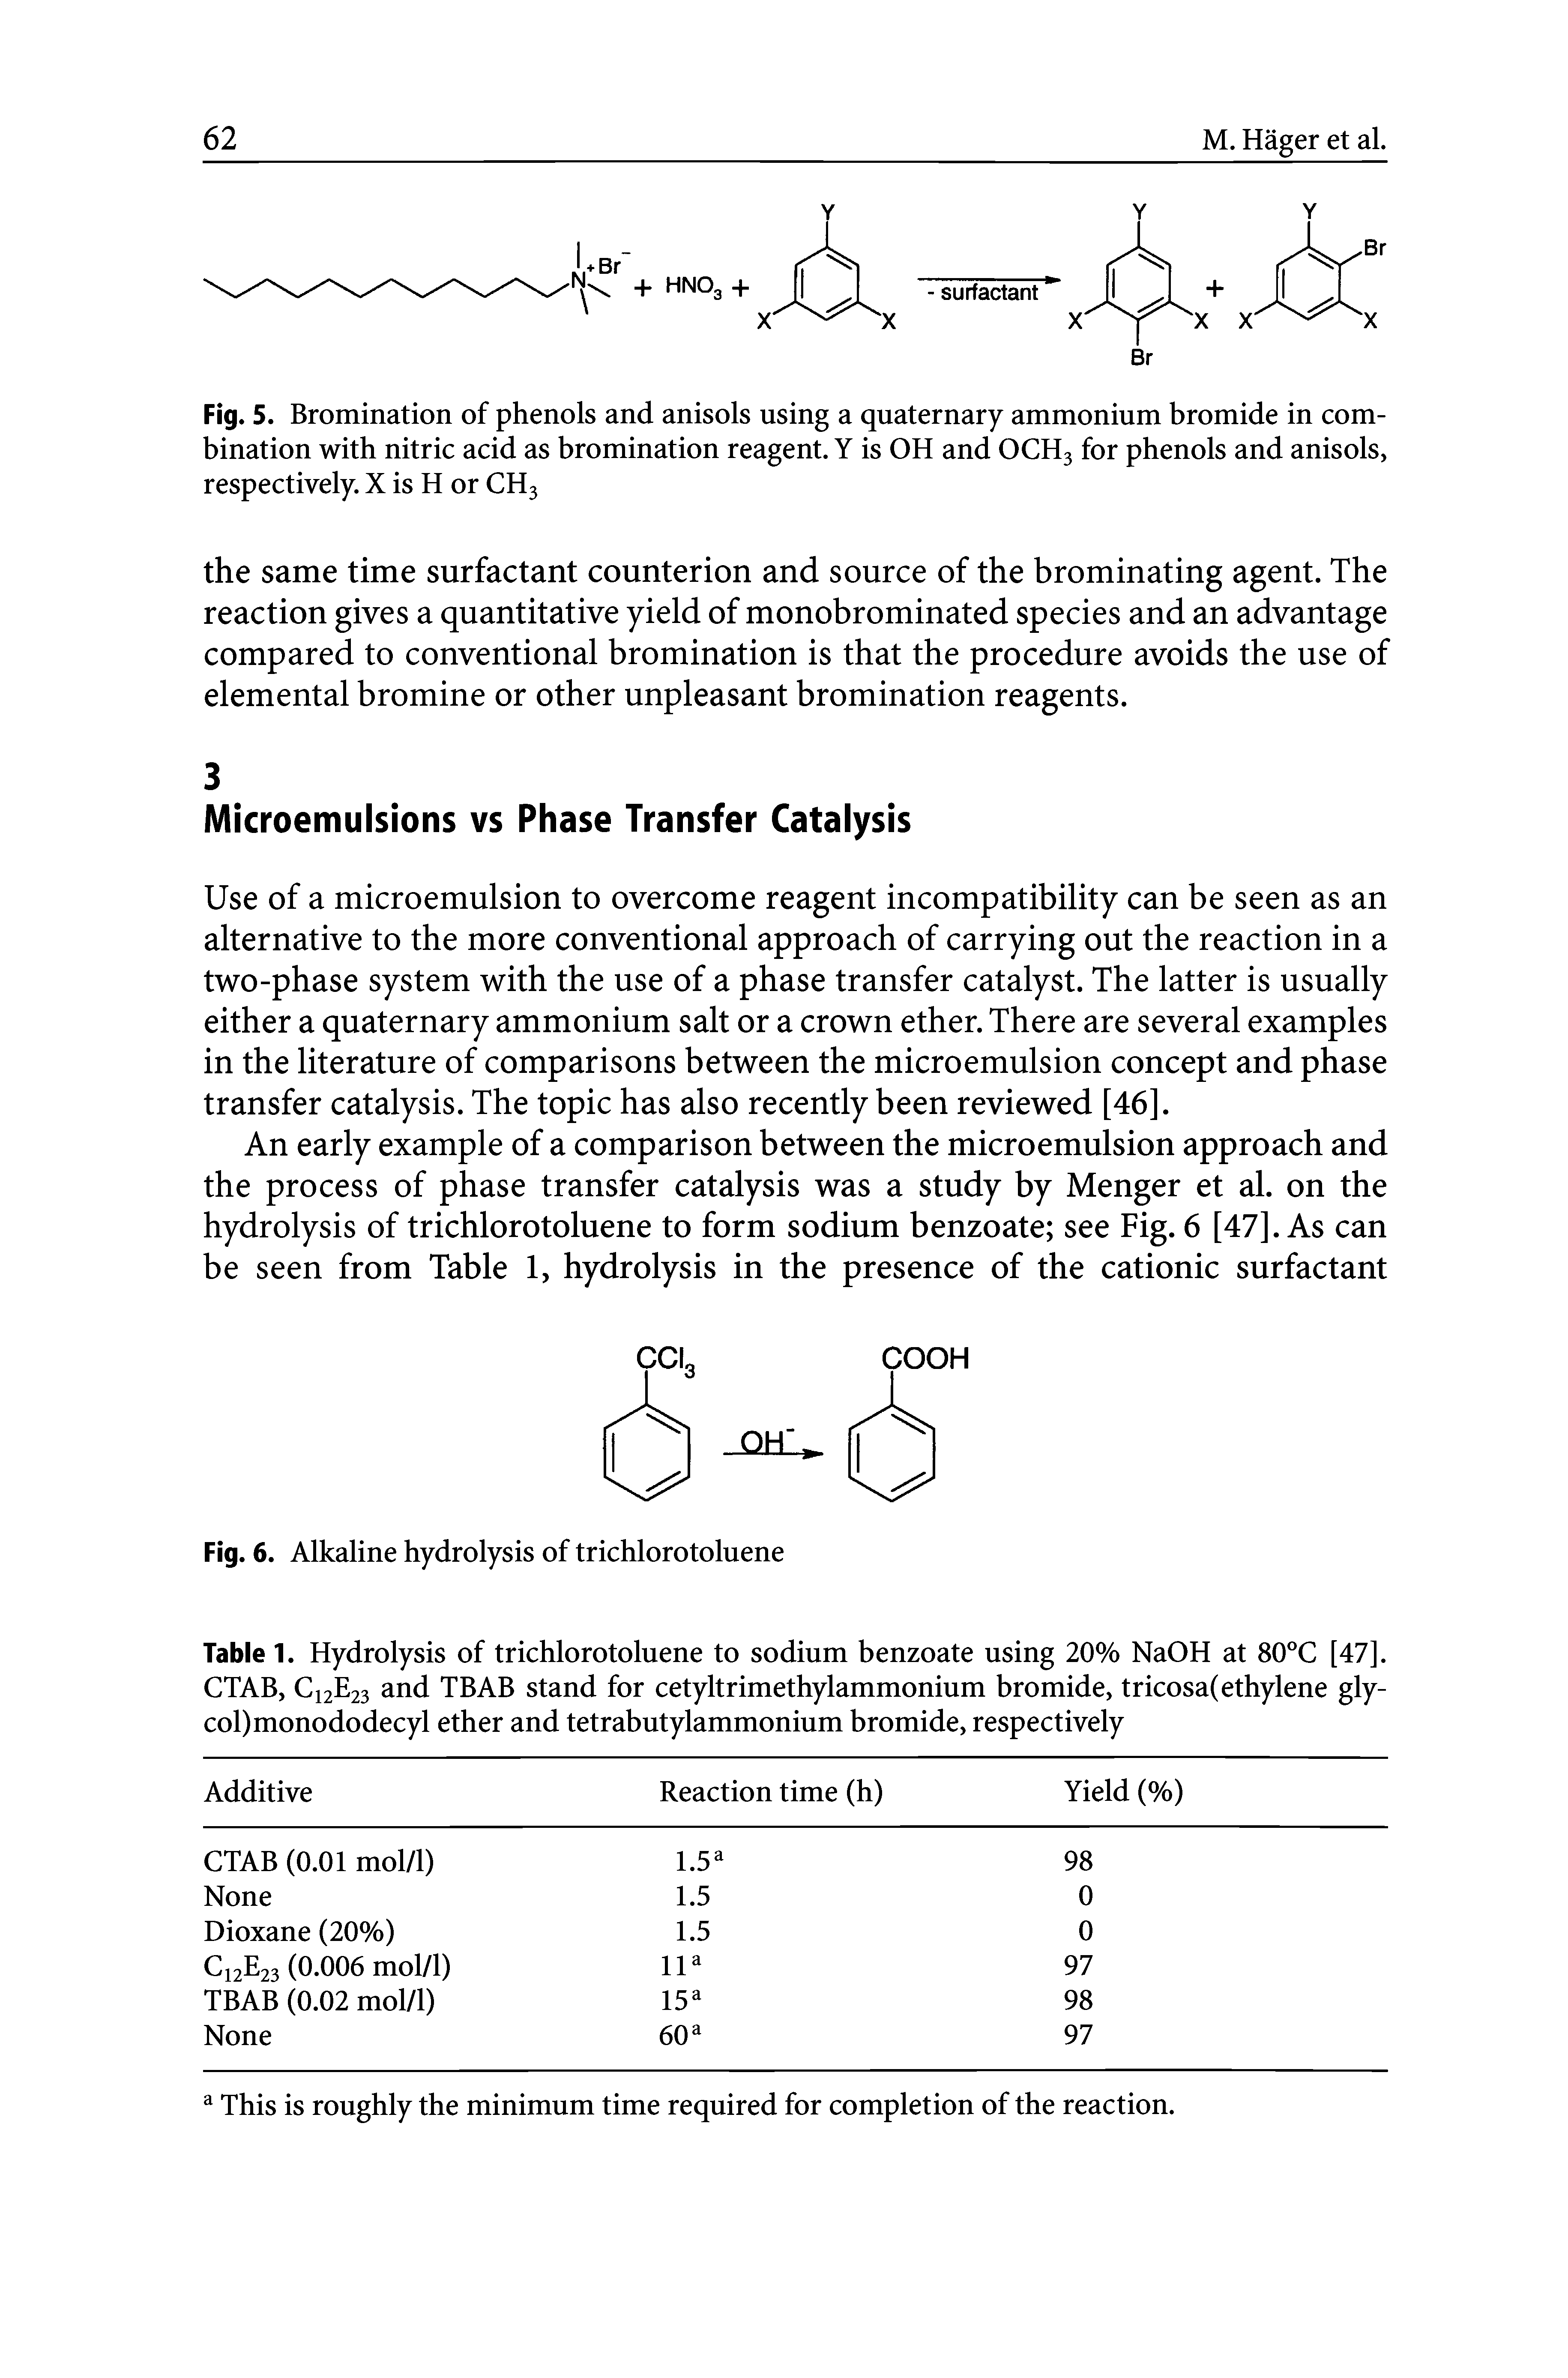 Fig. 5. Bromination of phenols and anisols using a quaternary ammonium bromide in combination with nitric acid as bromination reagent. Y is OH and OCH3 for phenols and anisols, respectively. X is H or CH3...